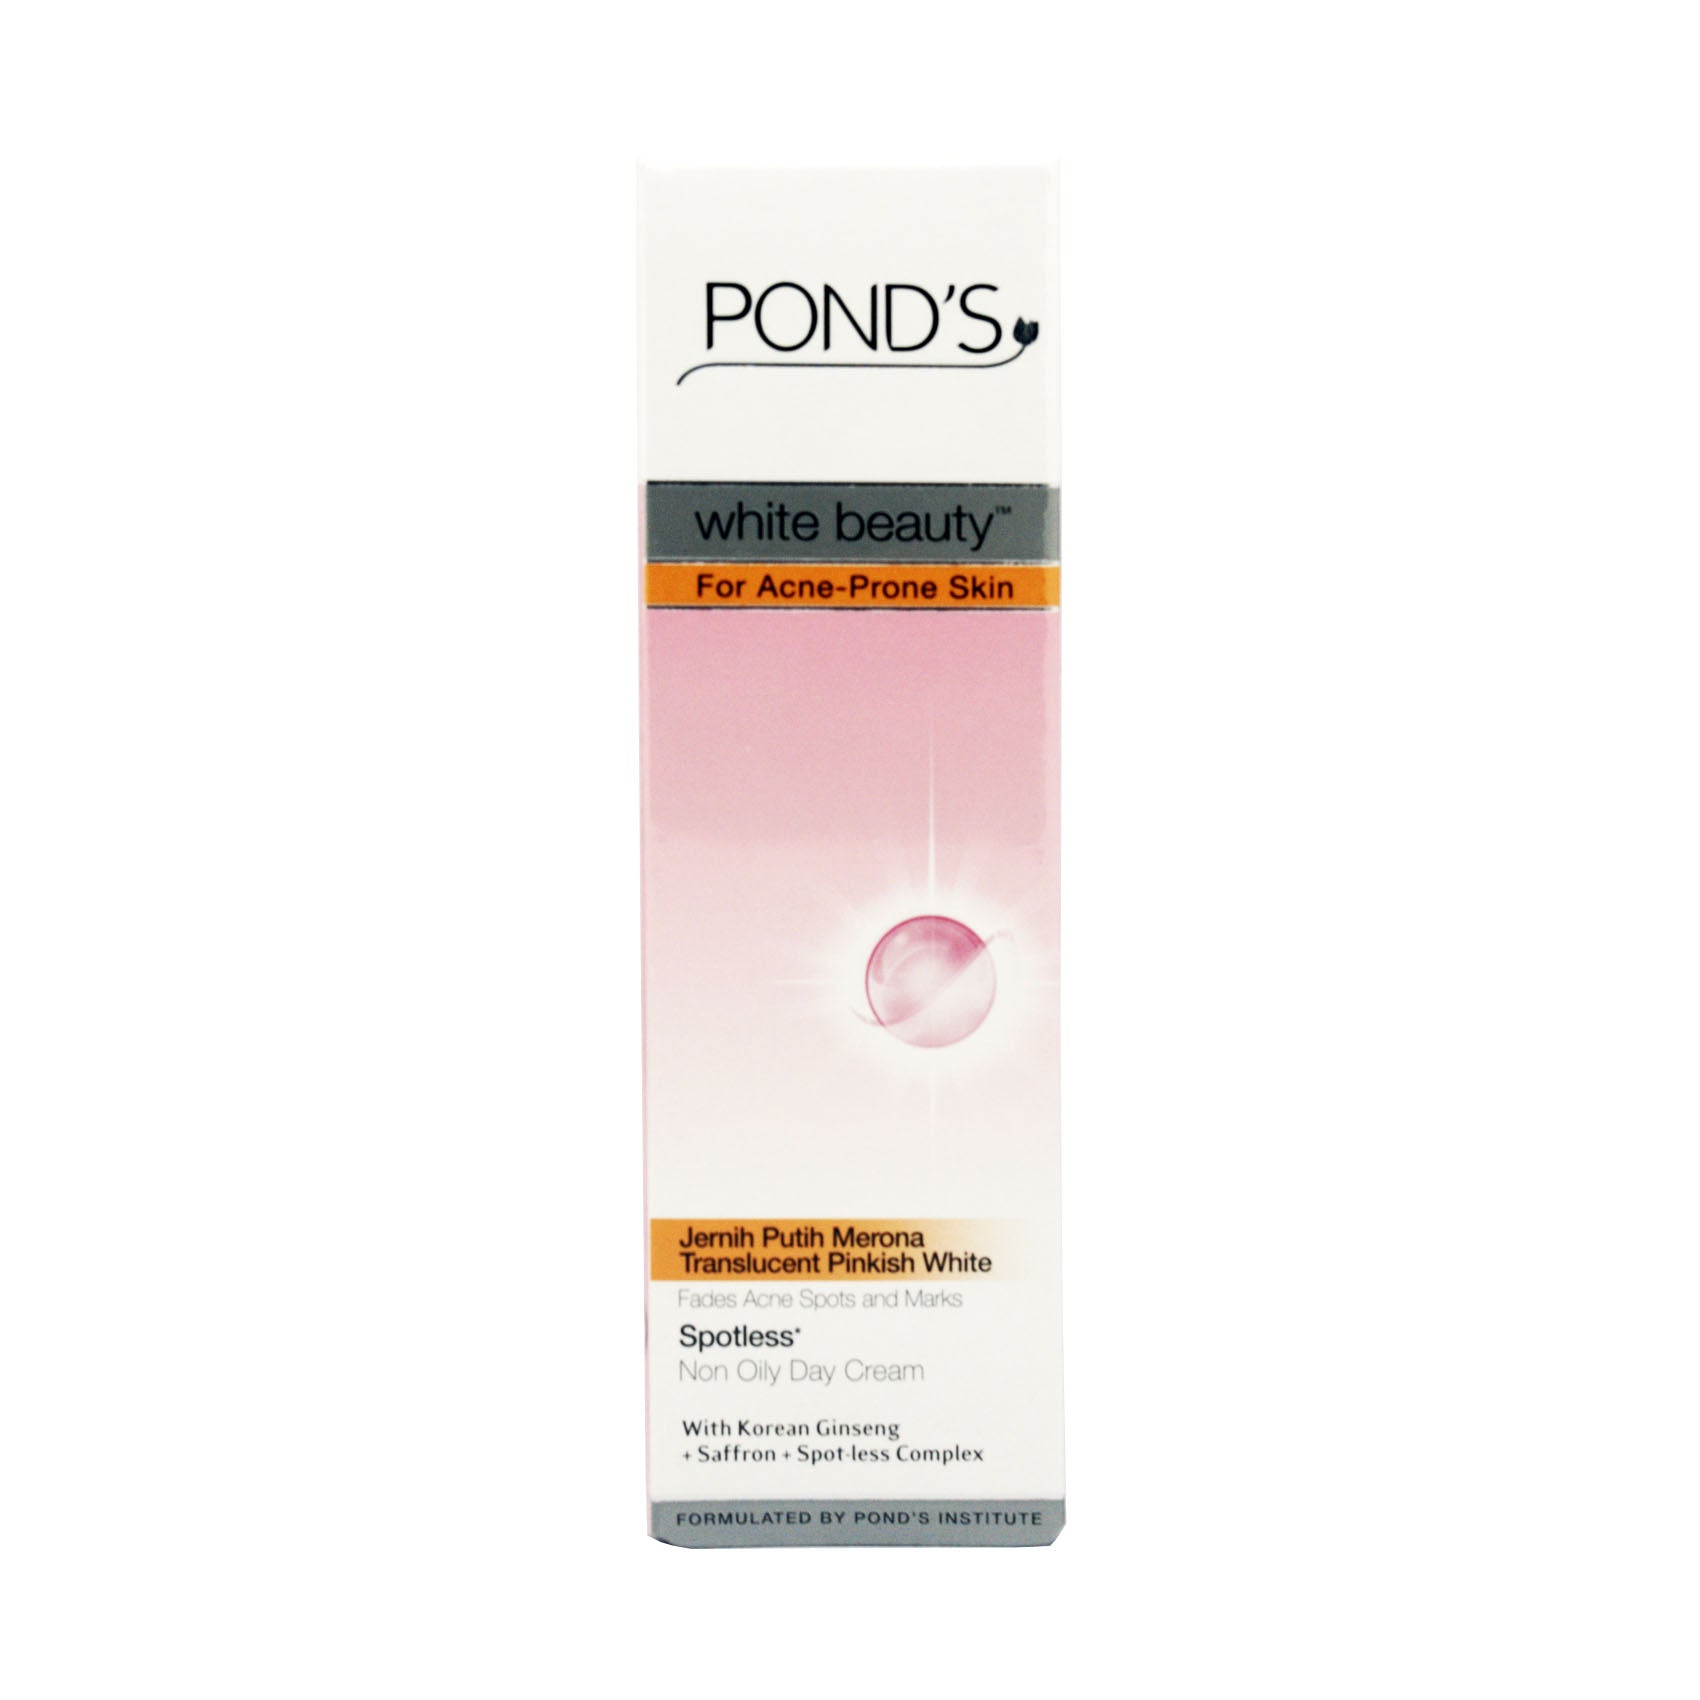 Pond's, White Beauty For Acne-Prone Skin, 20 g